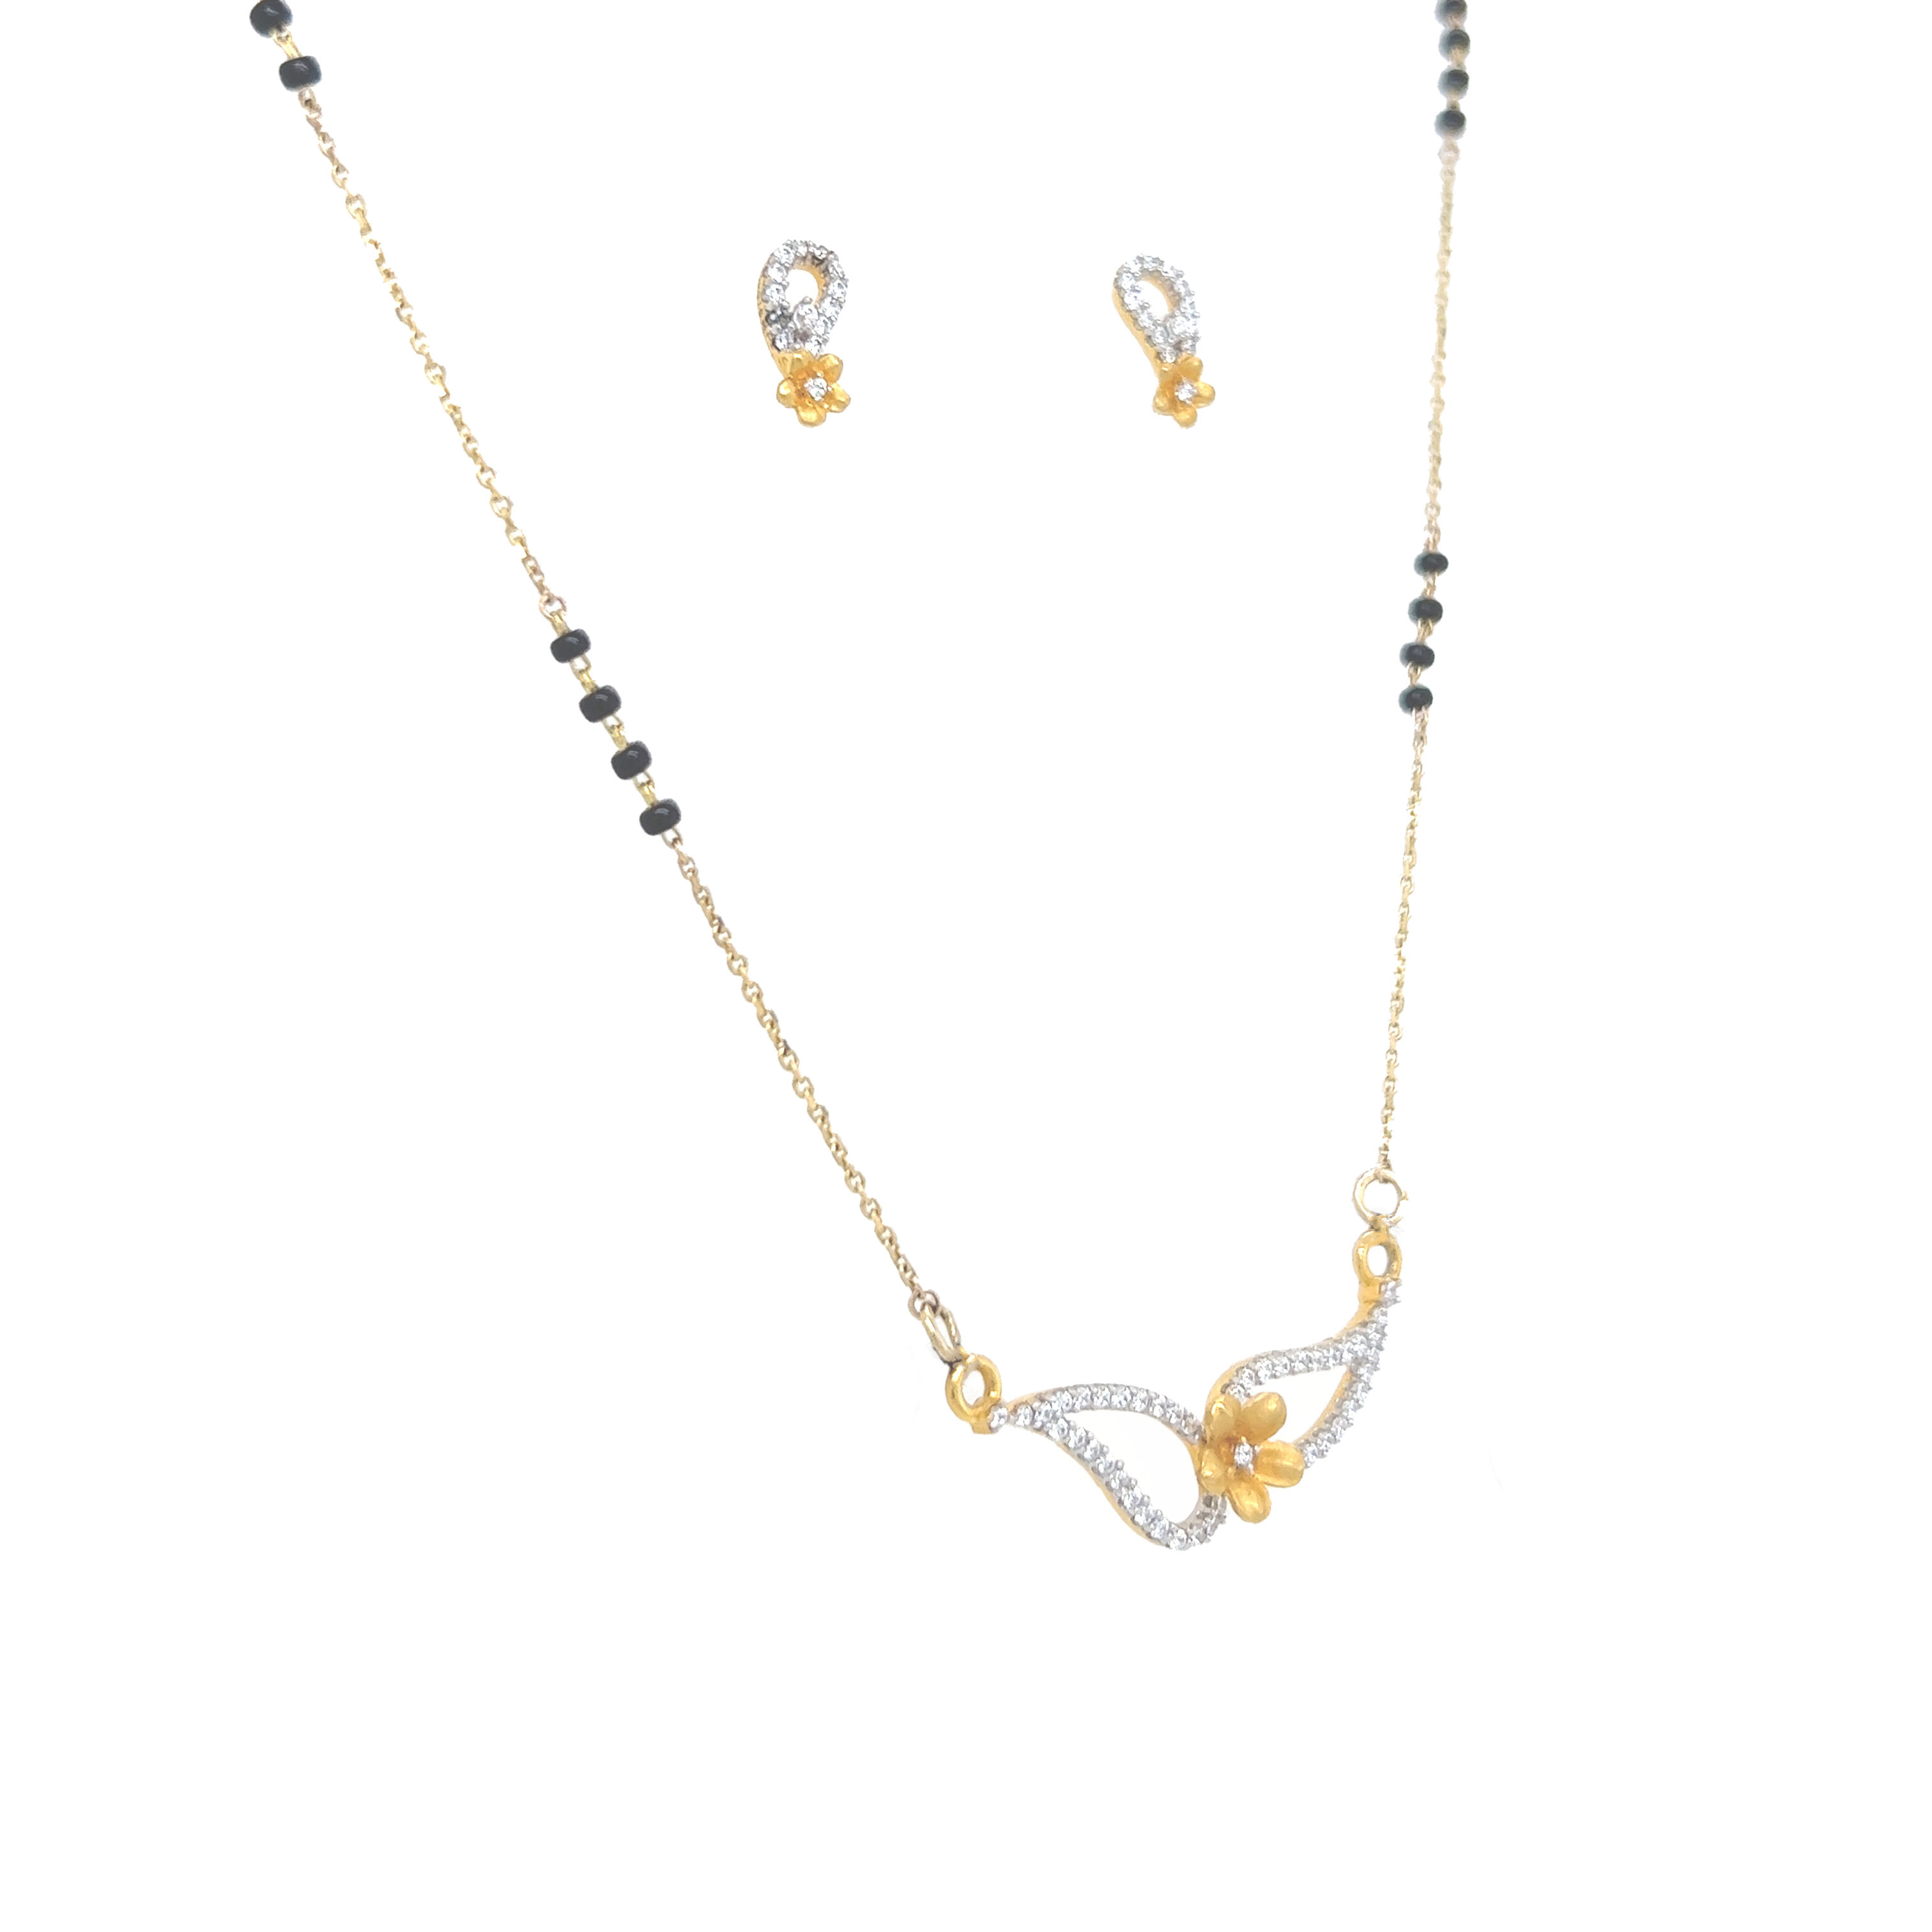 Charming Floral Gold Mangalsutra